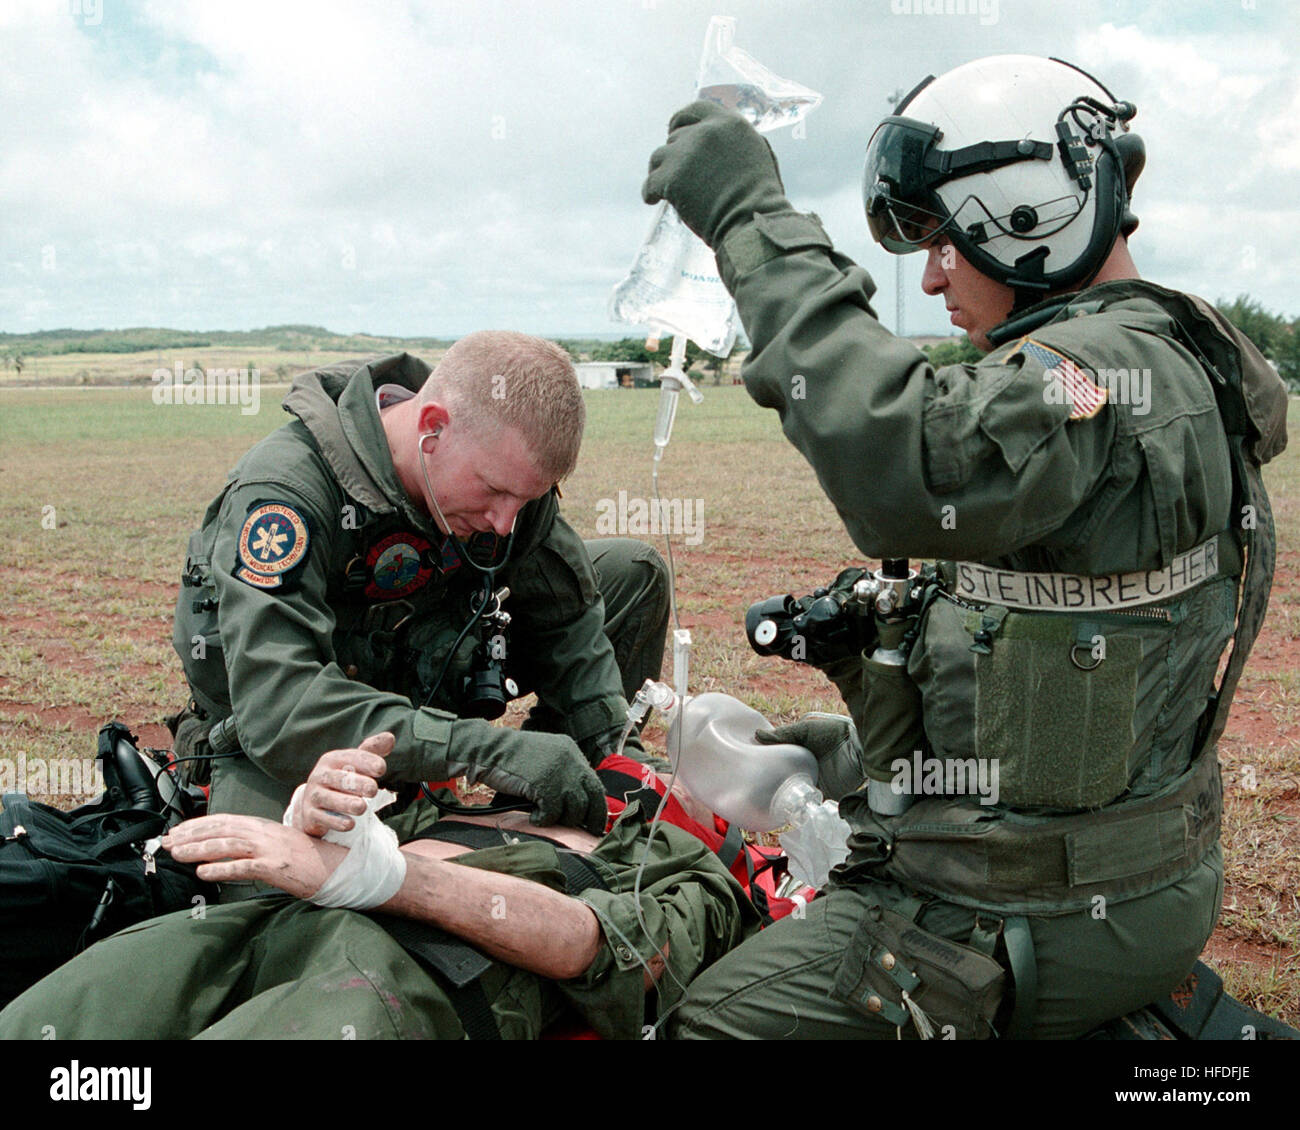 010531-N-3889M-004 Talofofo, Guam (May 31, 2001) -- Hospital Corpsman 3rd Class Raymond Munn from Cheyenne, WY, assigned to the 'Providers' of Helicopter Combat Support Squadron Five (HC-5), listens for correct tube placement on an intubated trauma victim during a search and rescue (SAR) exercise.  Aviation Machinist's Mate 3rd Class Todd Steinbrecher (right) from Kansas City, KS, assists in the simulated rescue. U.S. Navy photo by Photographer's Mate 2nd Class Marjorie McNamee.  (RELEASED) US Navy 010531-N-3889M-004 Navy Corpsman Field Training Exercise Stock Photo